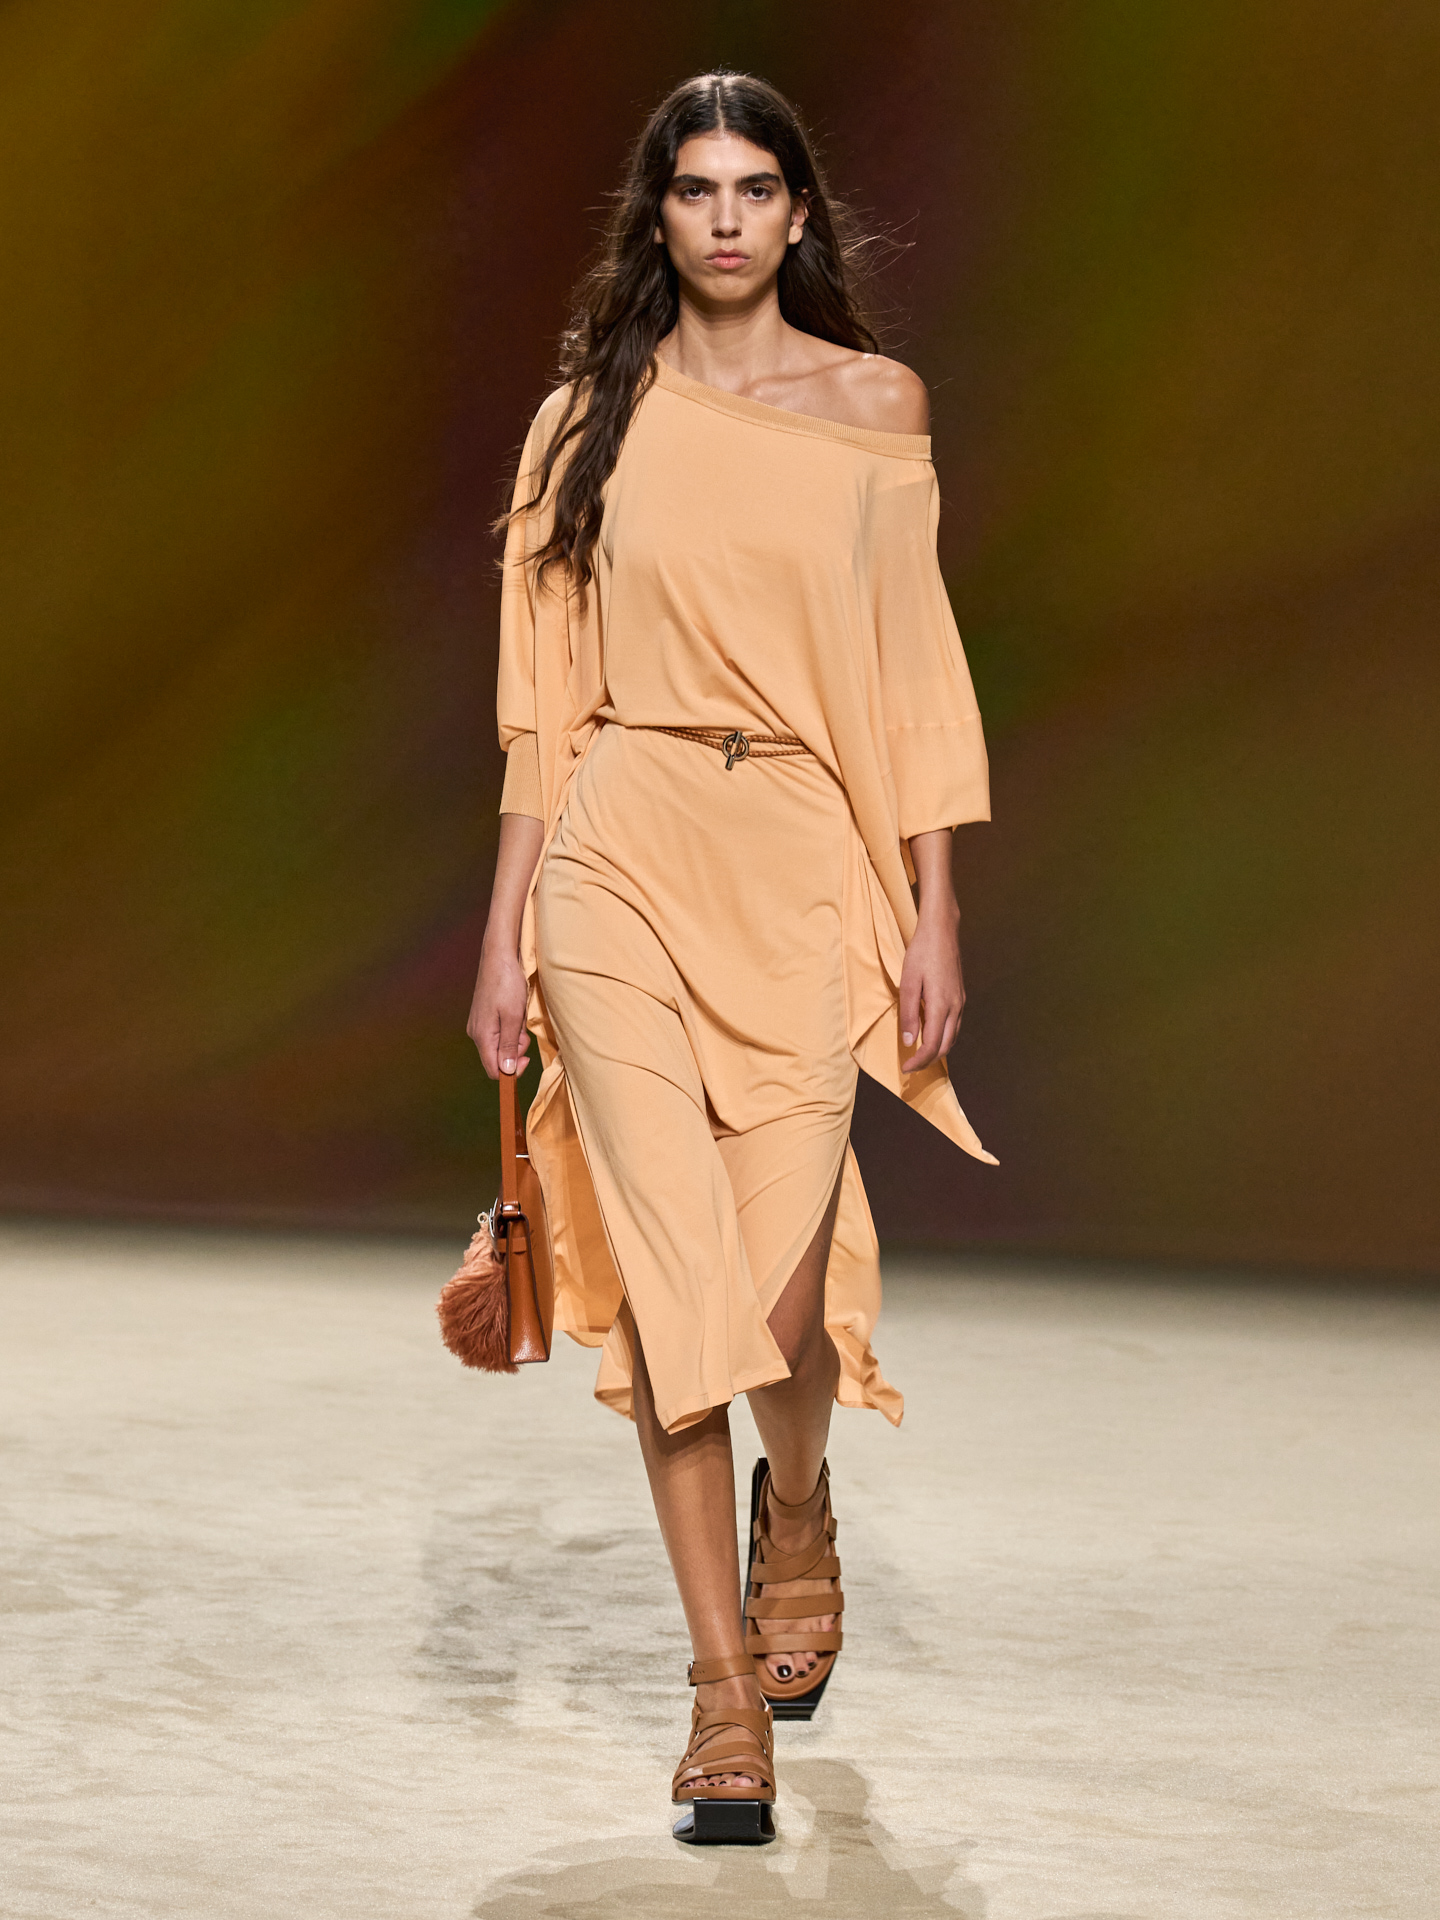 The latest color from the Hermes Fall/Winter 2022 collection